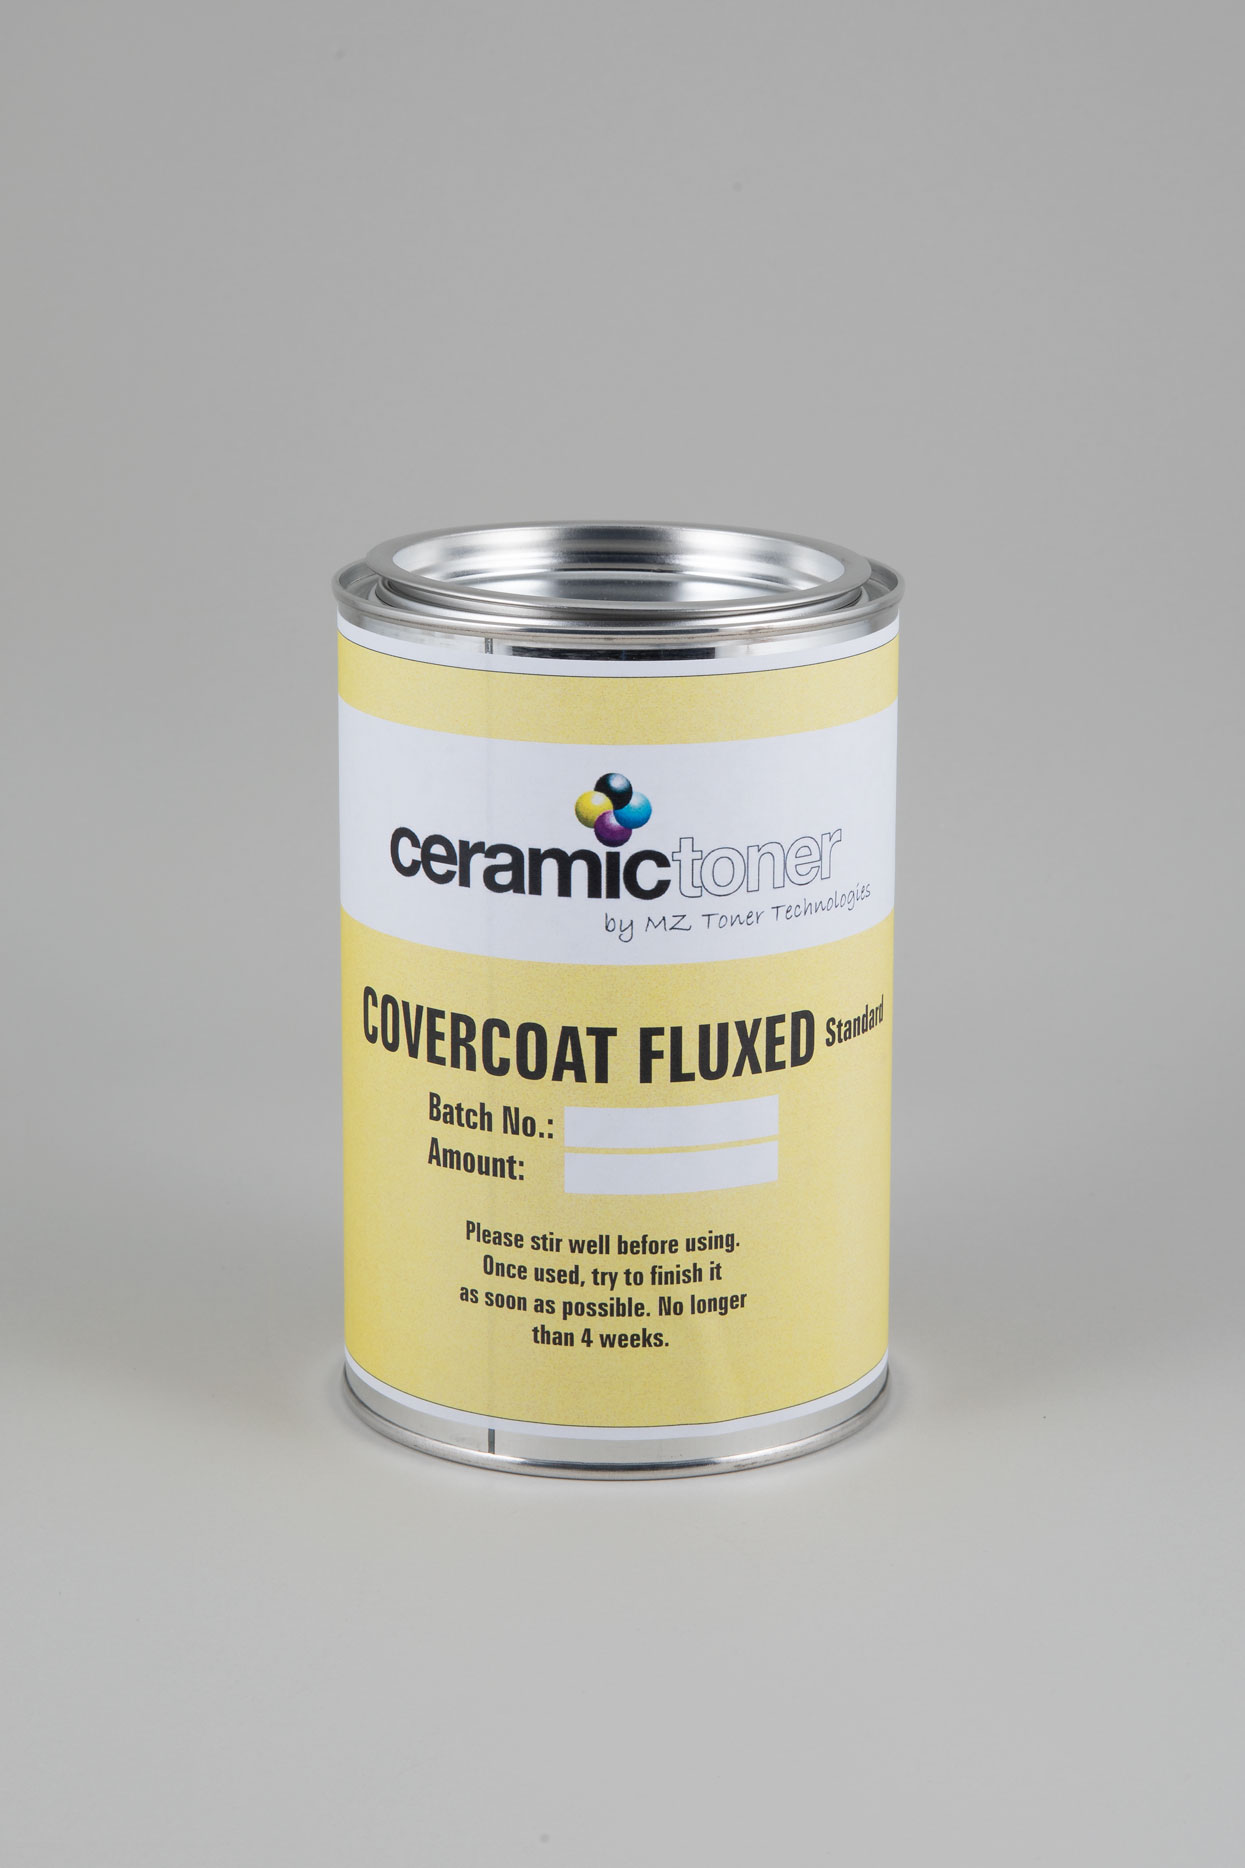 Ceramictoner Covercoat Fluxed Standard is coating with standard flow. The coating is in a can and is suitable for porcelain and ceramics. The coating is yellowish...